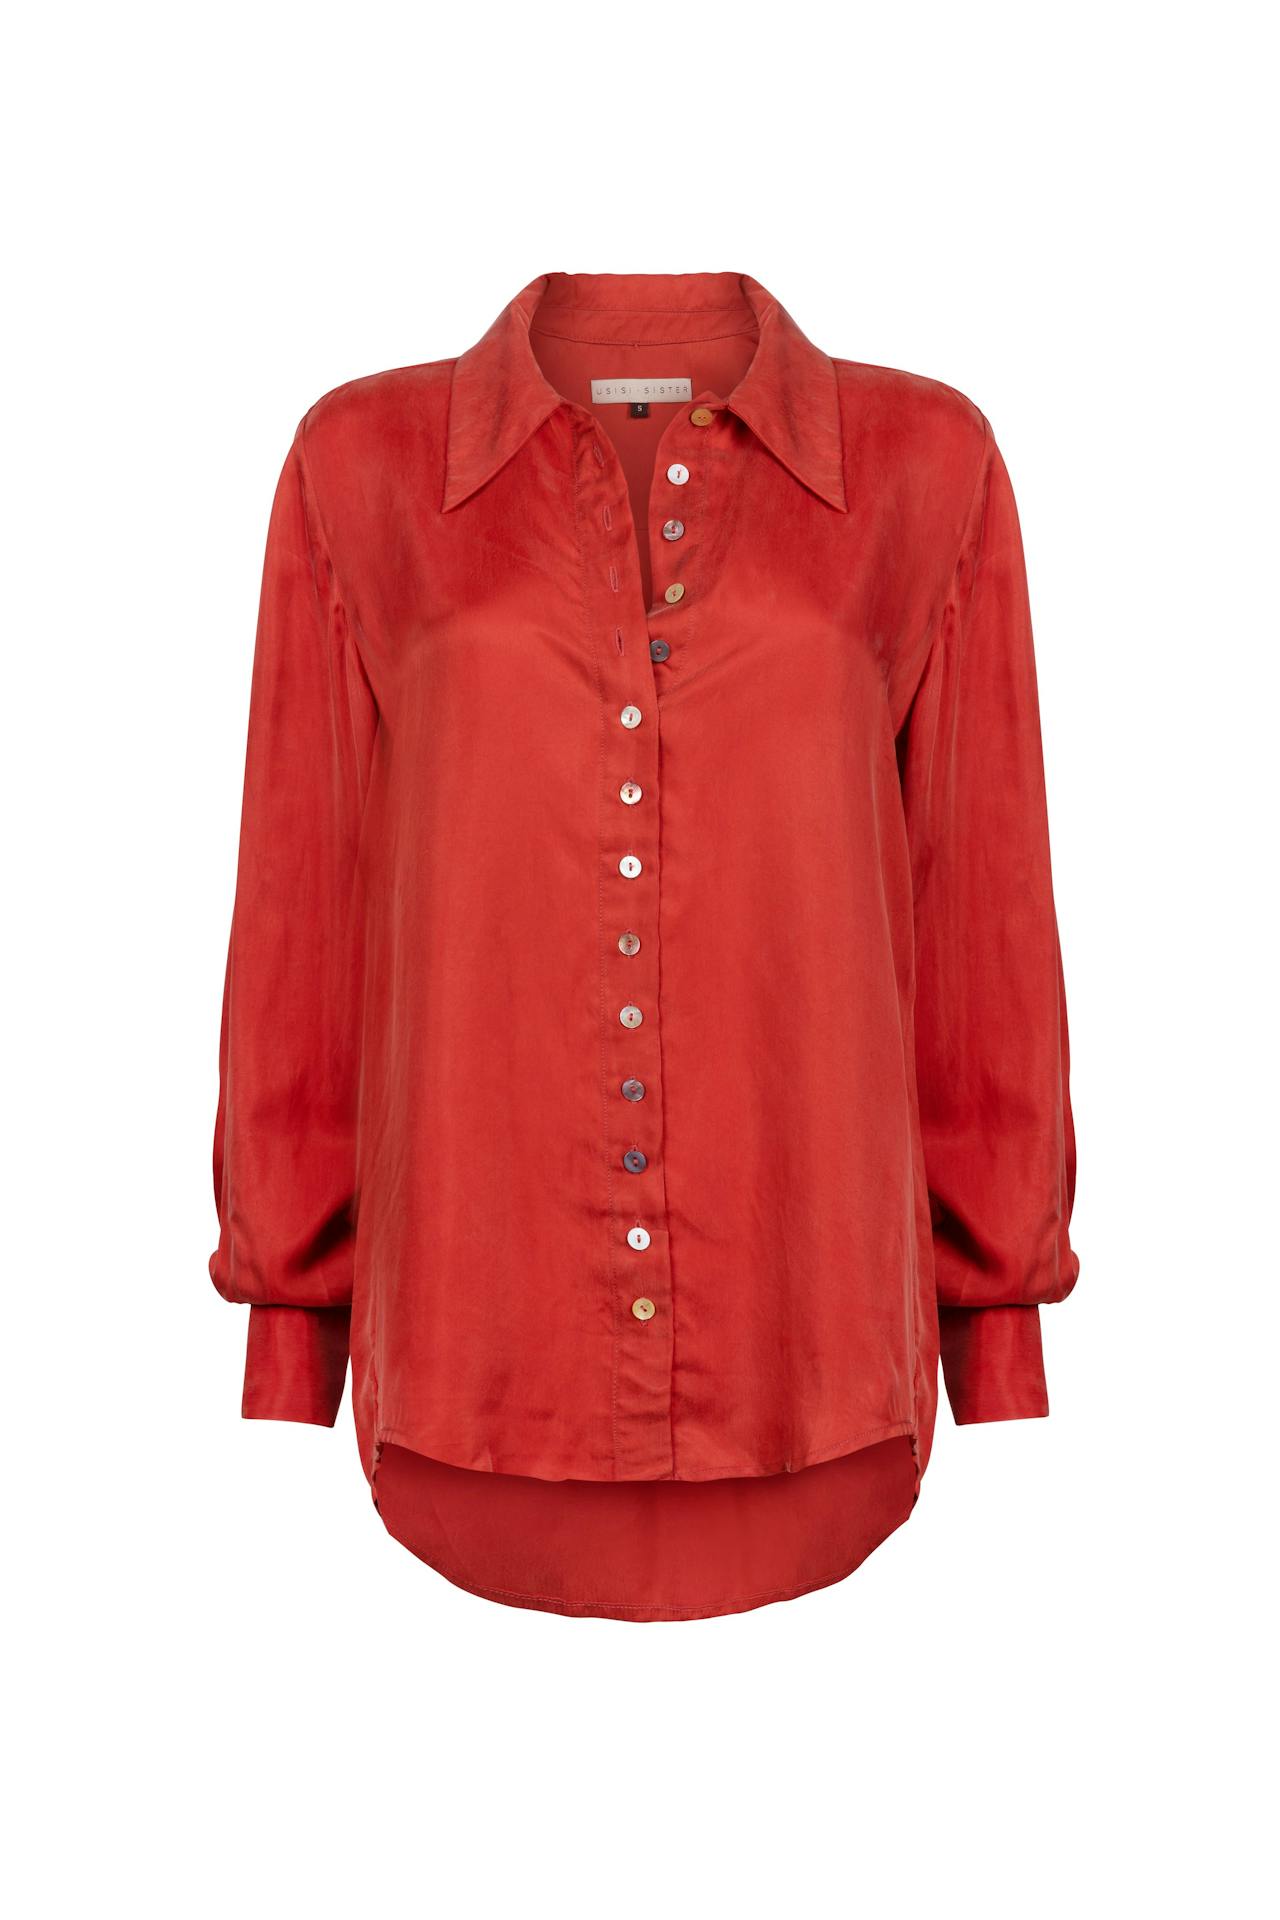 Minnie red shirt with mother of pearl detail